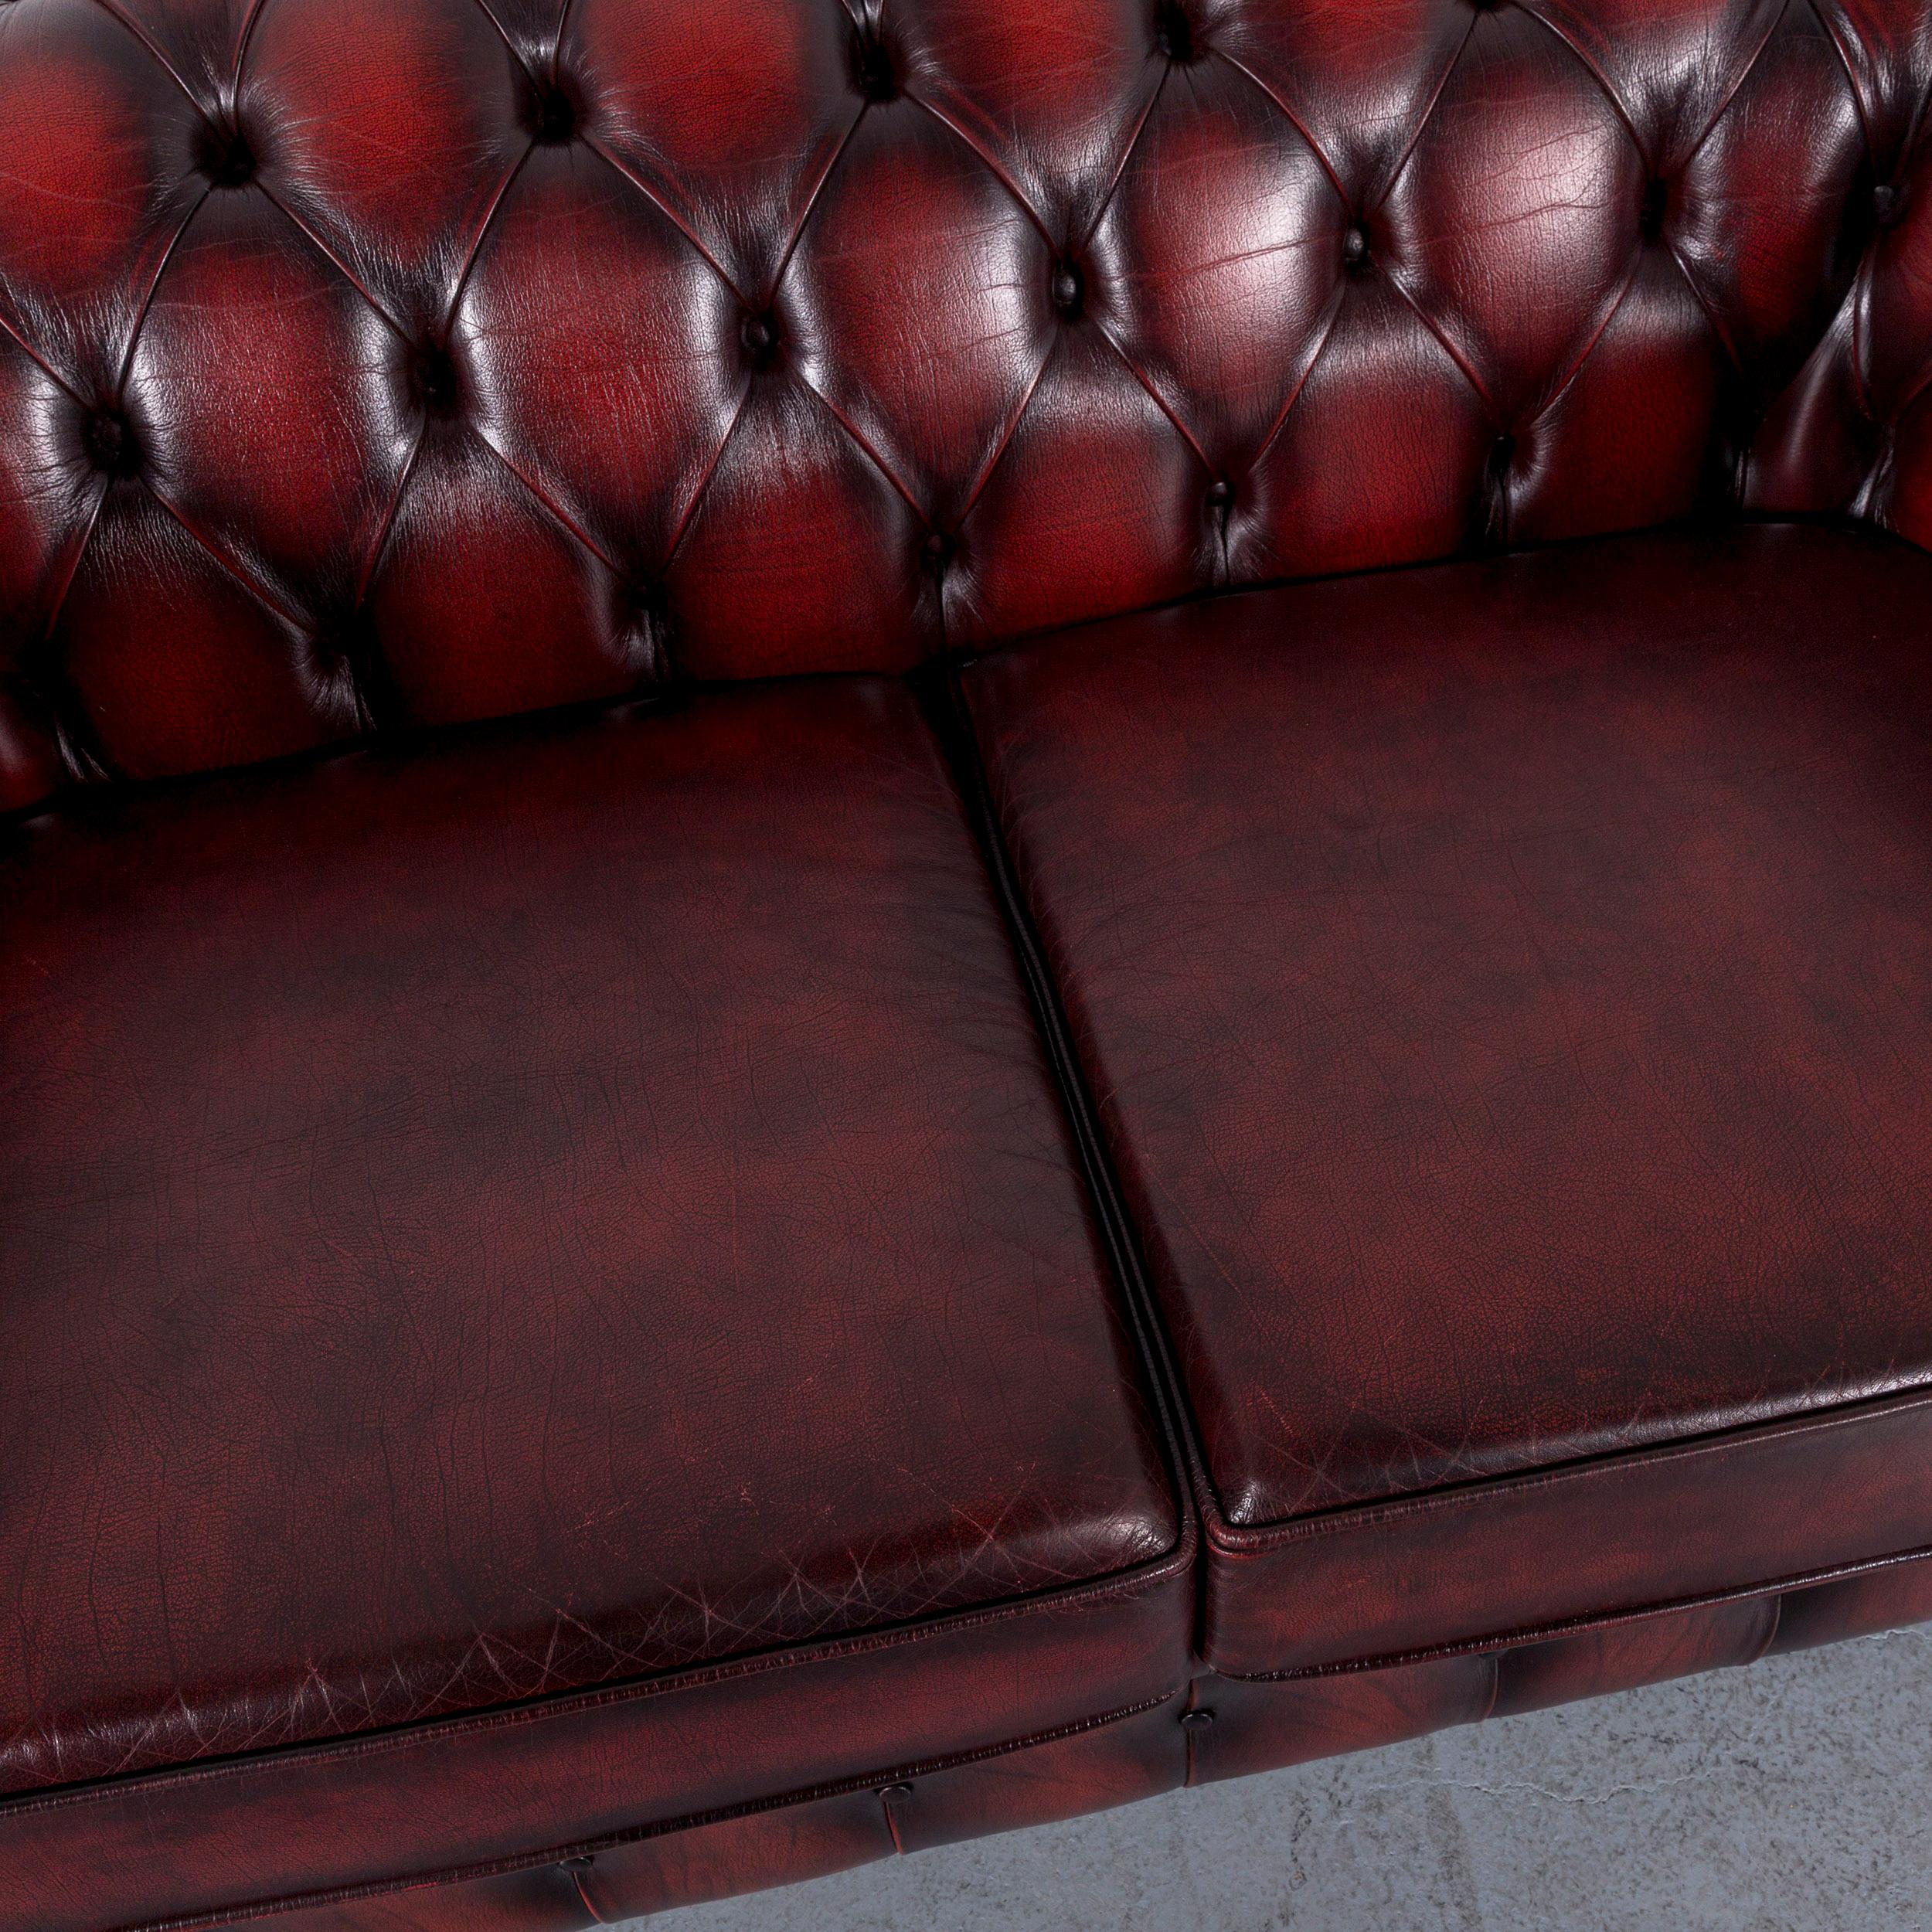 Contemporary Chesterfield Leather Sofa Red Two-Seat Vintage Retro